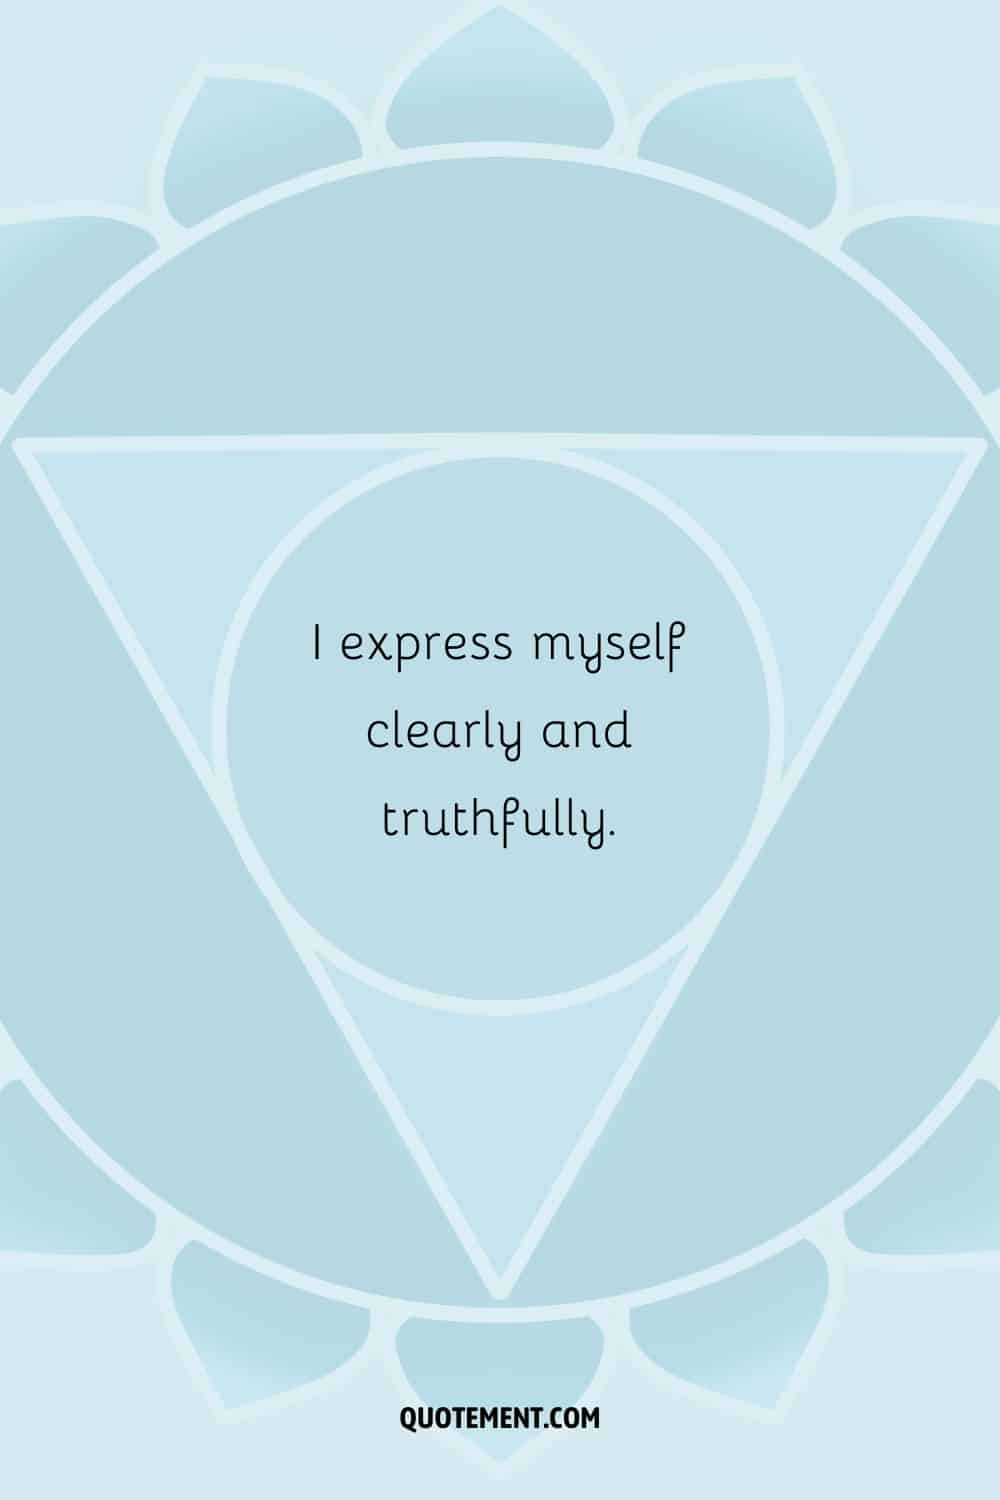 “I express myself clearly and truthfully.”